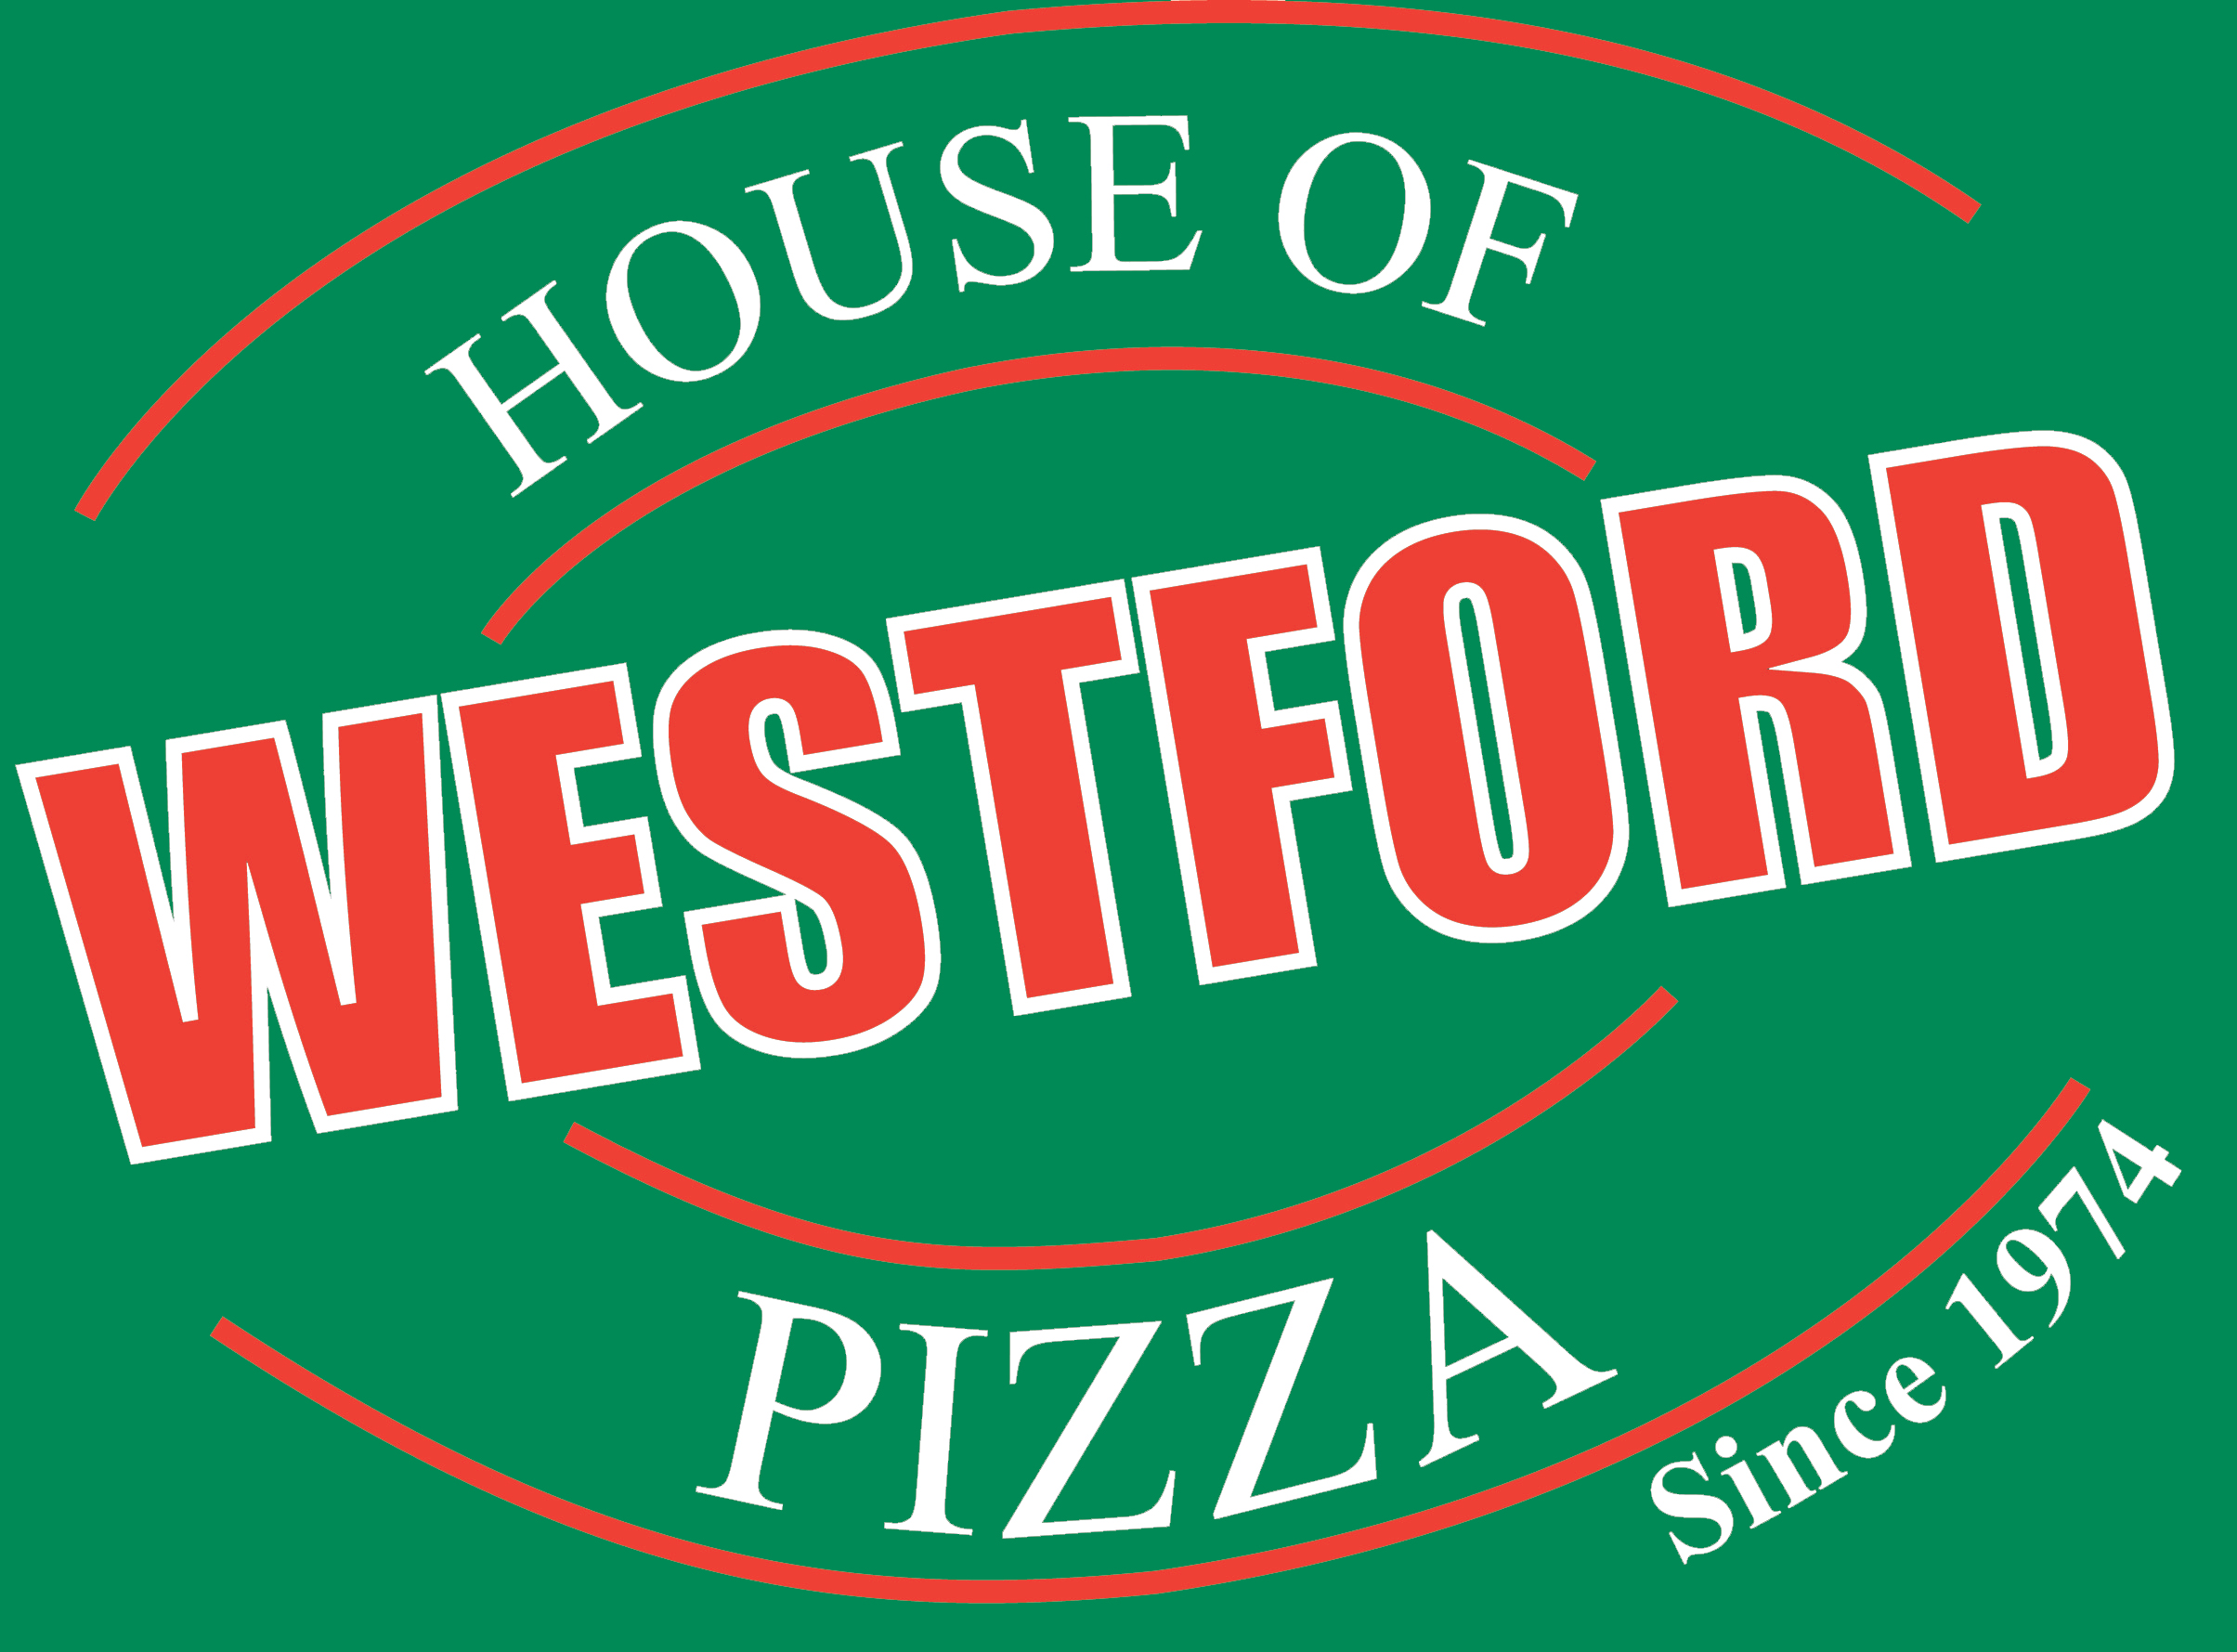 Westford House of Pizza Logo